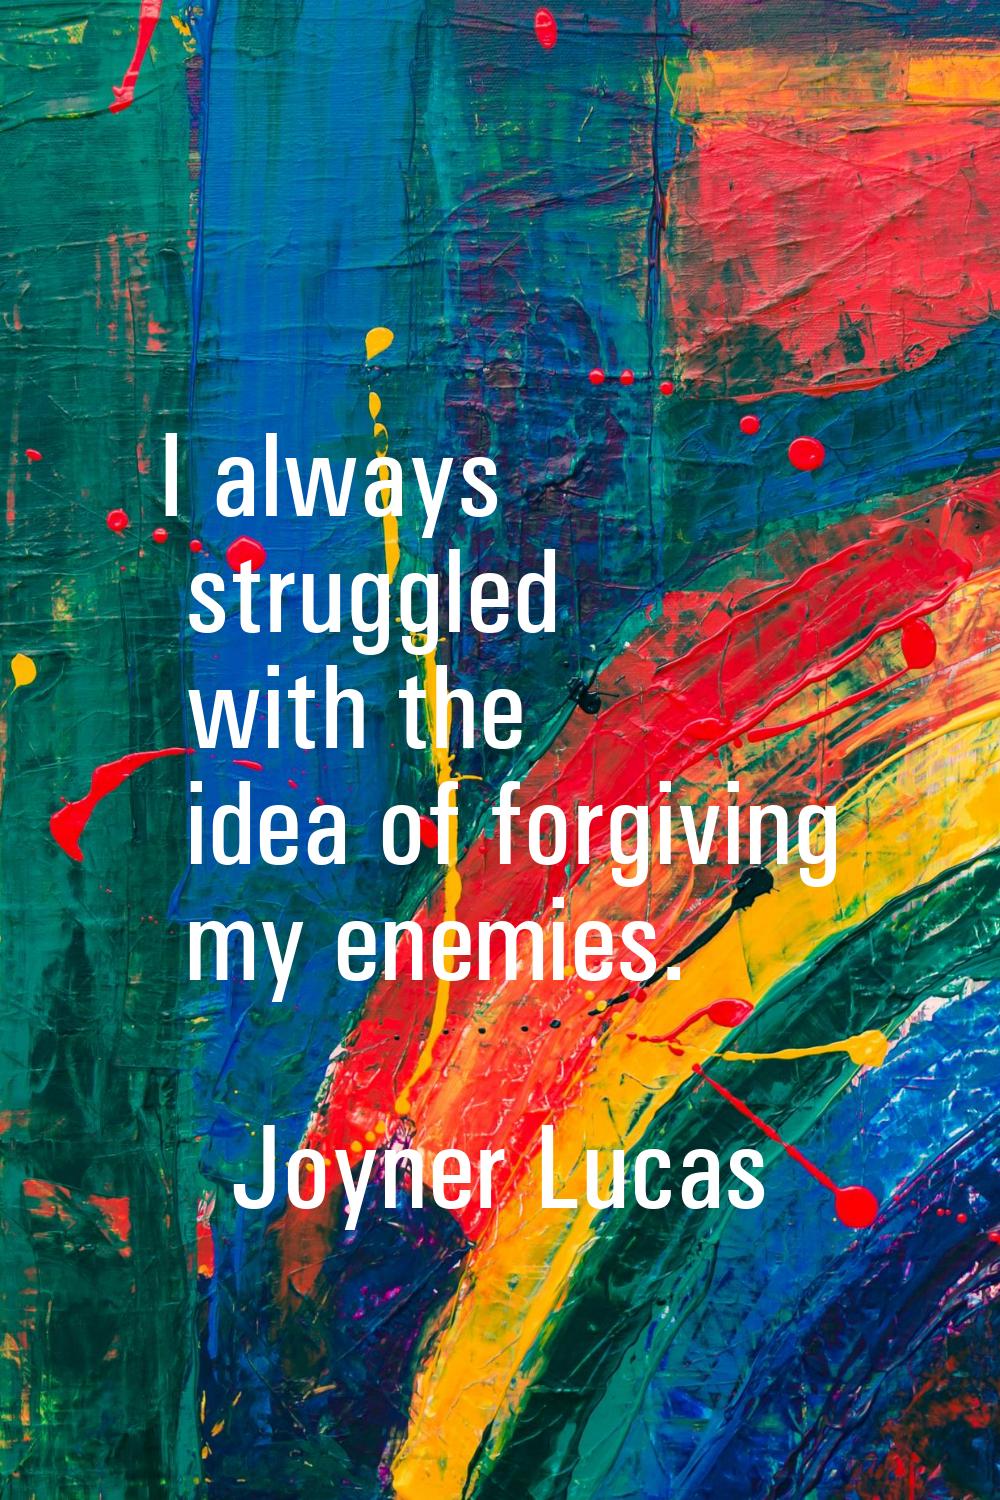 I always struggled with the idea of forgiving my enemies.